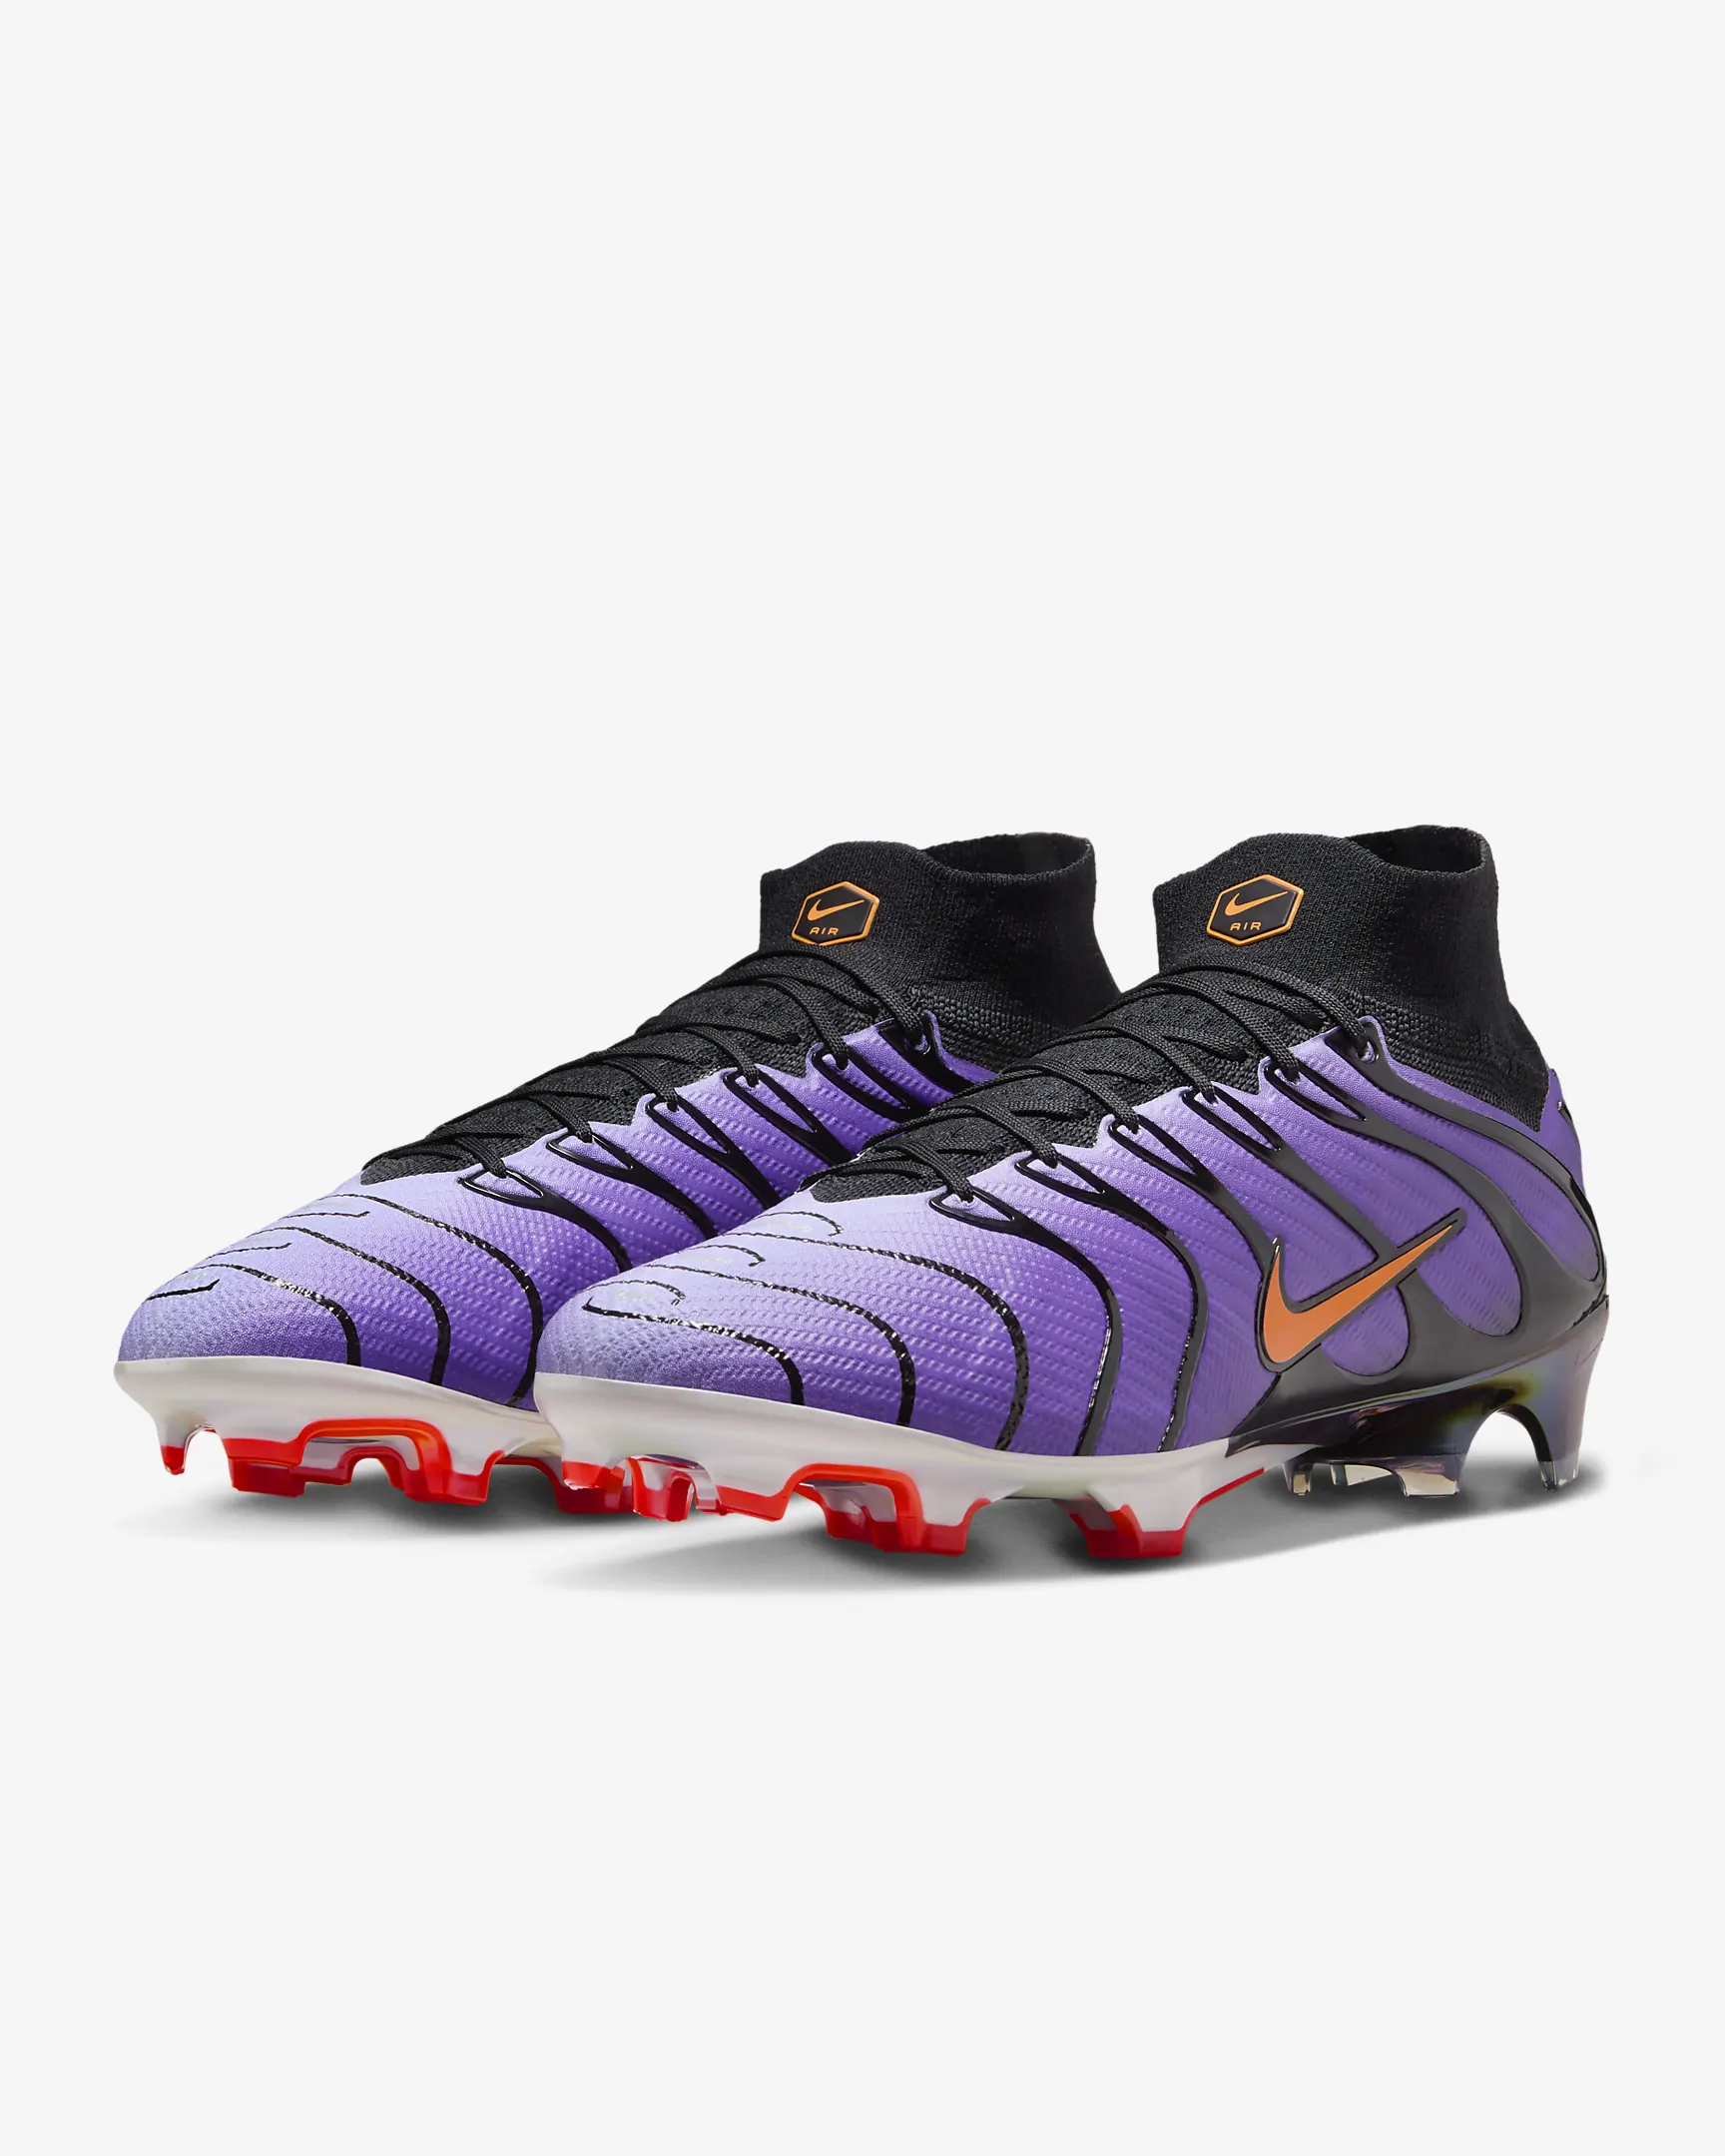 Nike Mercurial Superfly 9 FG 'Voltage Purple' releases GOAT